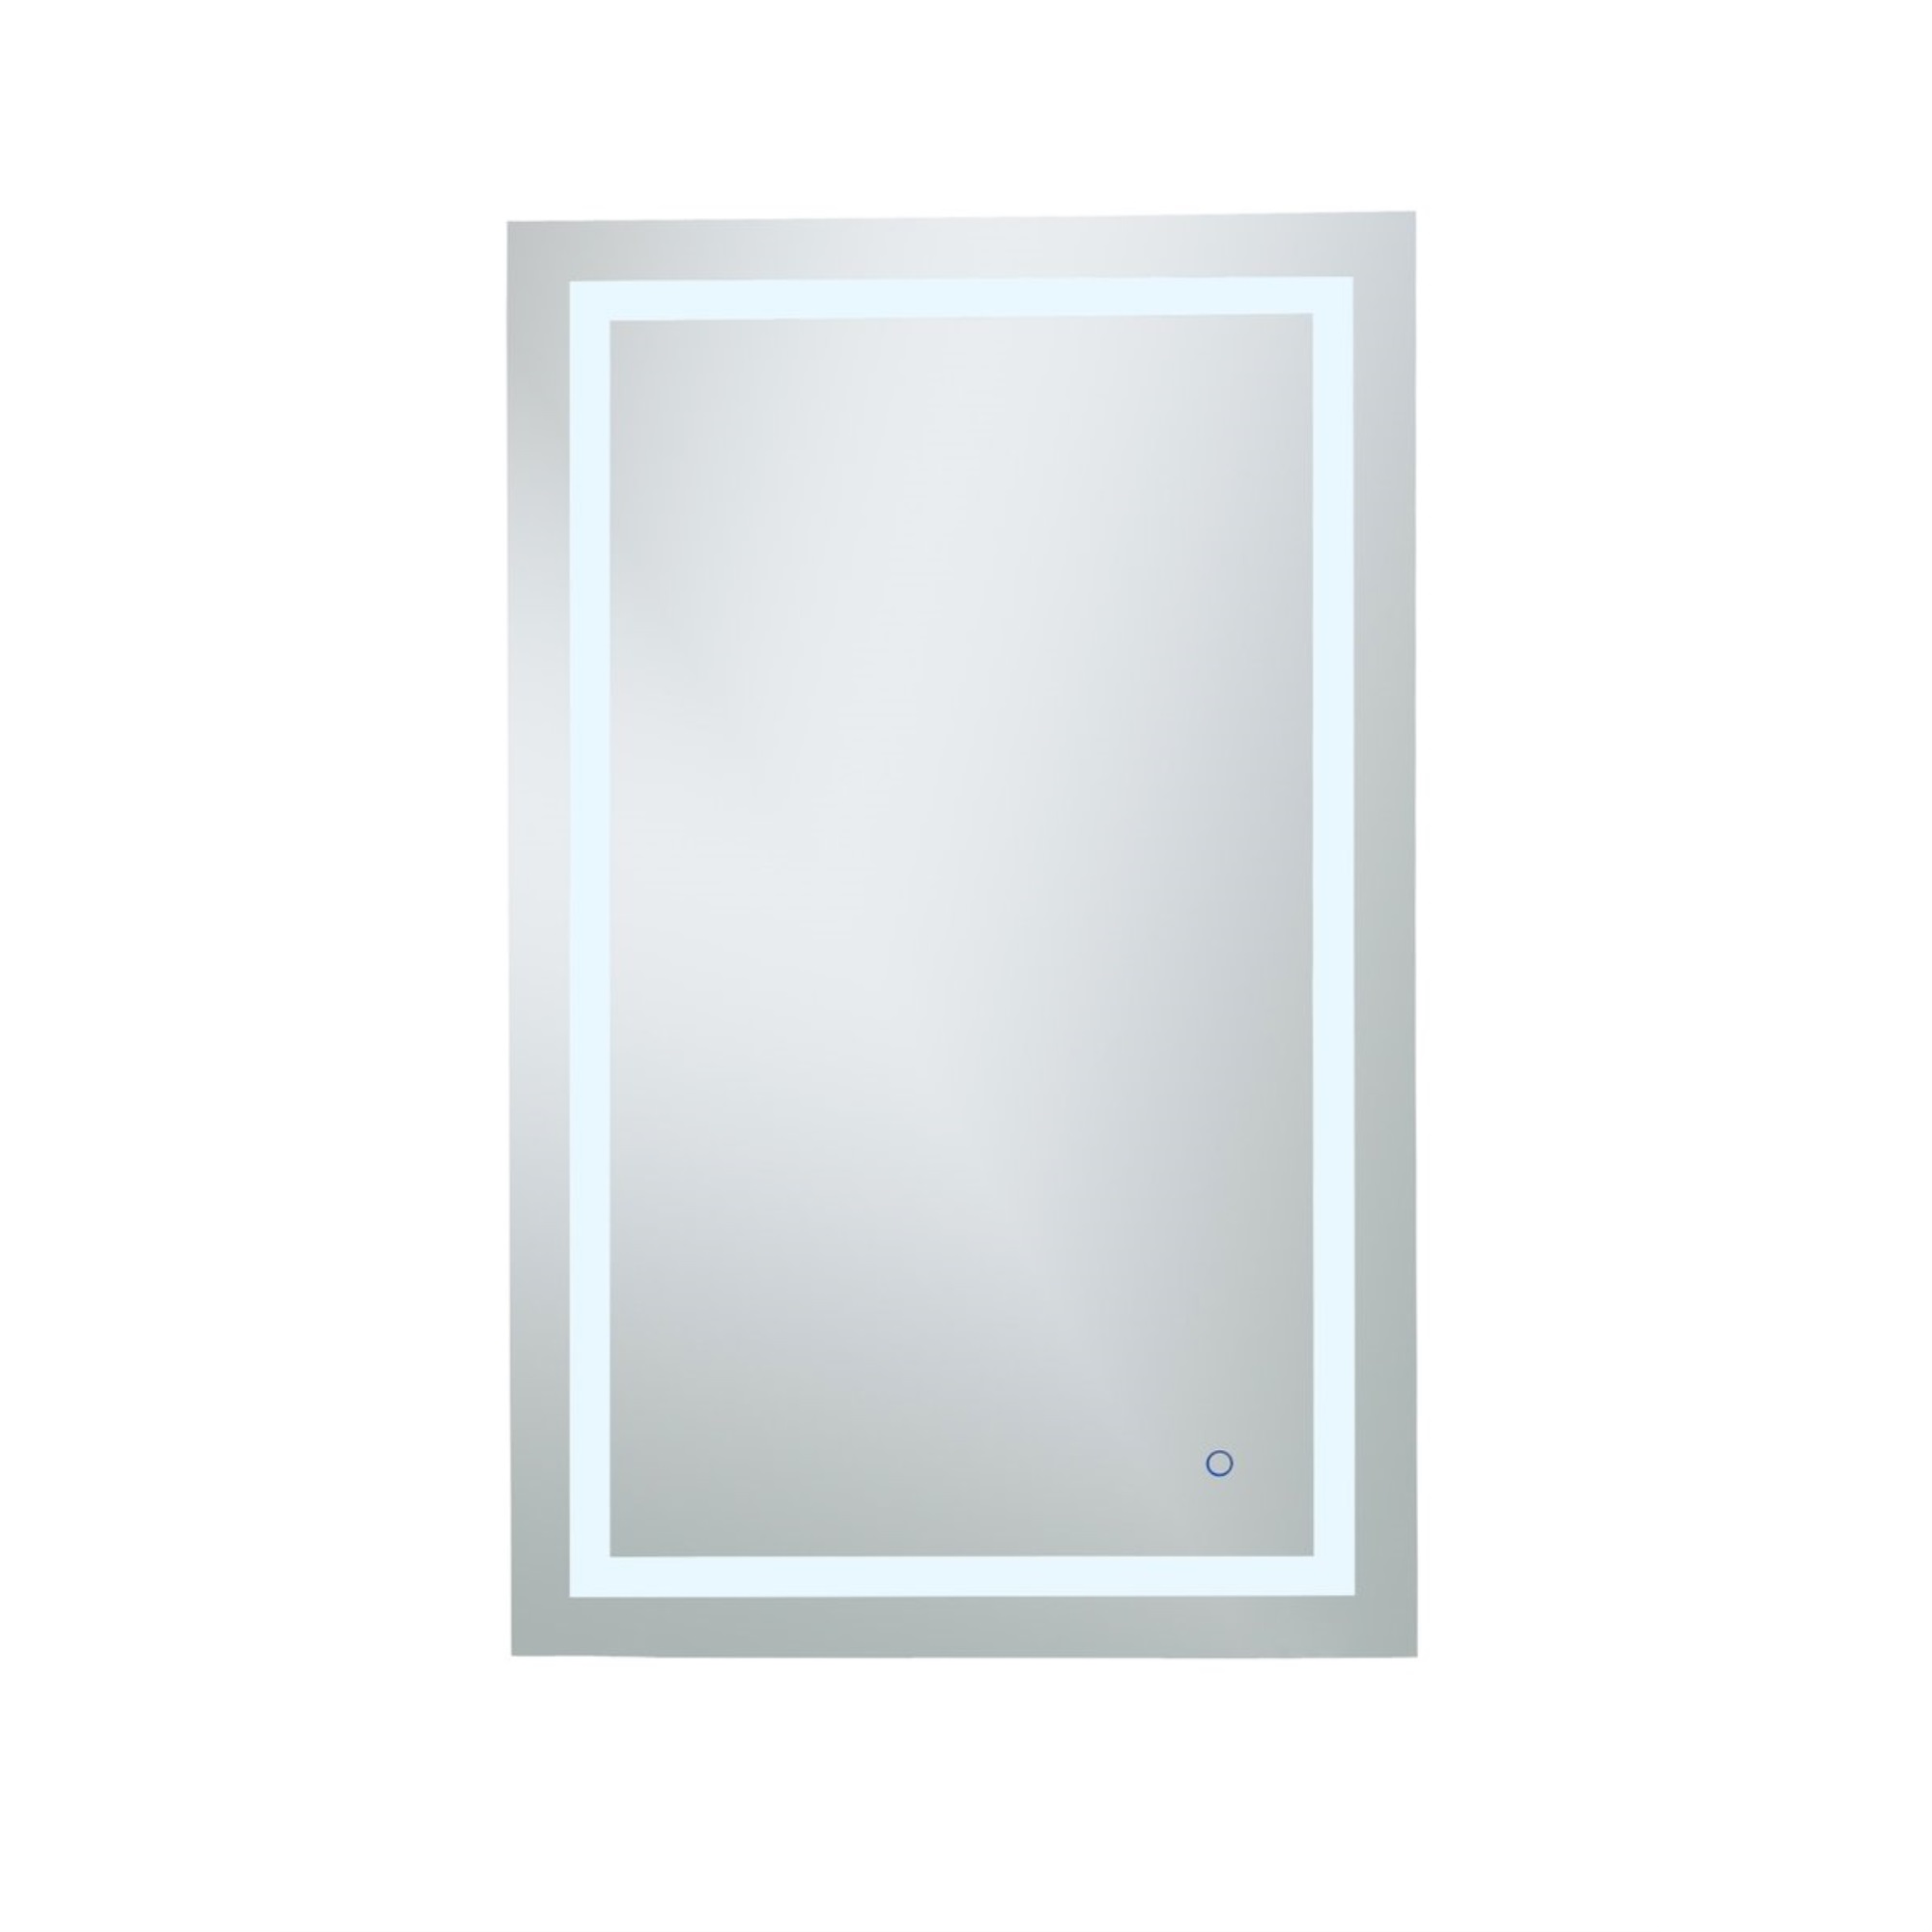 Elegant Decor Helios 30in x 48in Hardwired LED mirror with touch sensor and color changing temperature 3000K/4200K/6400K